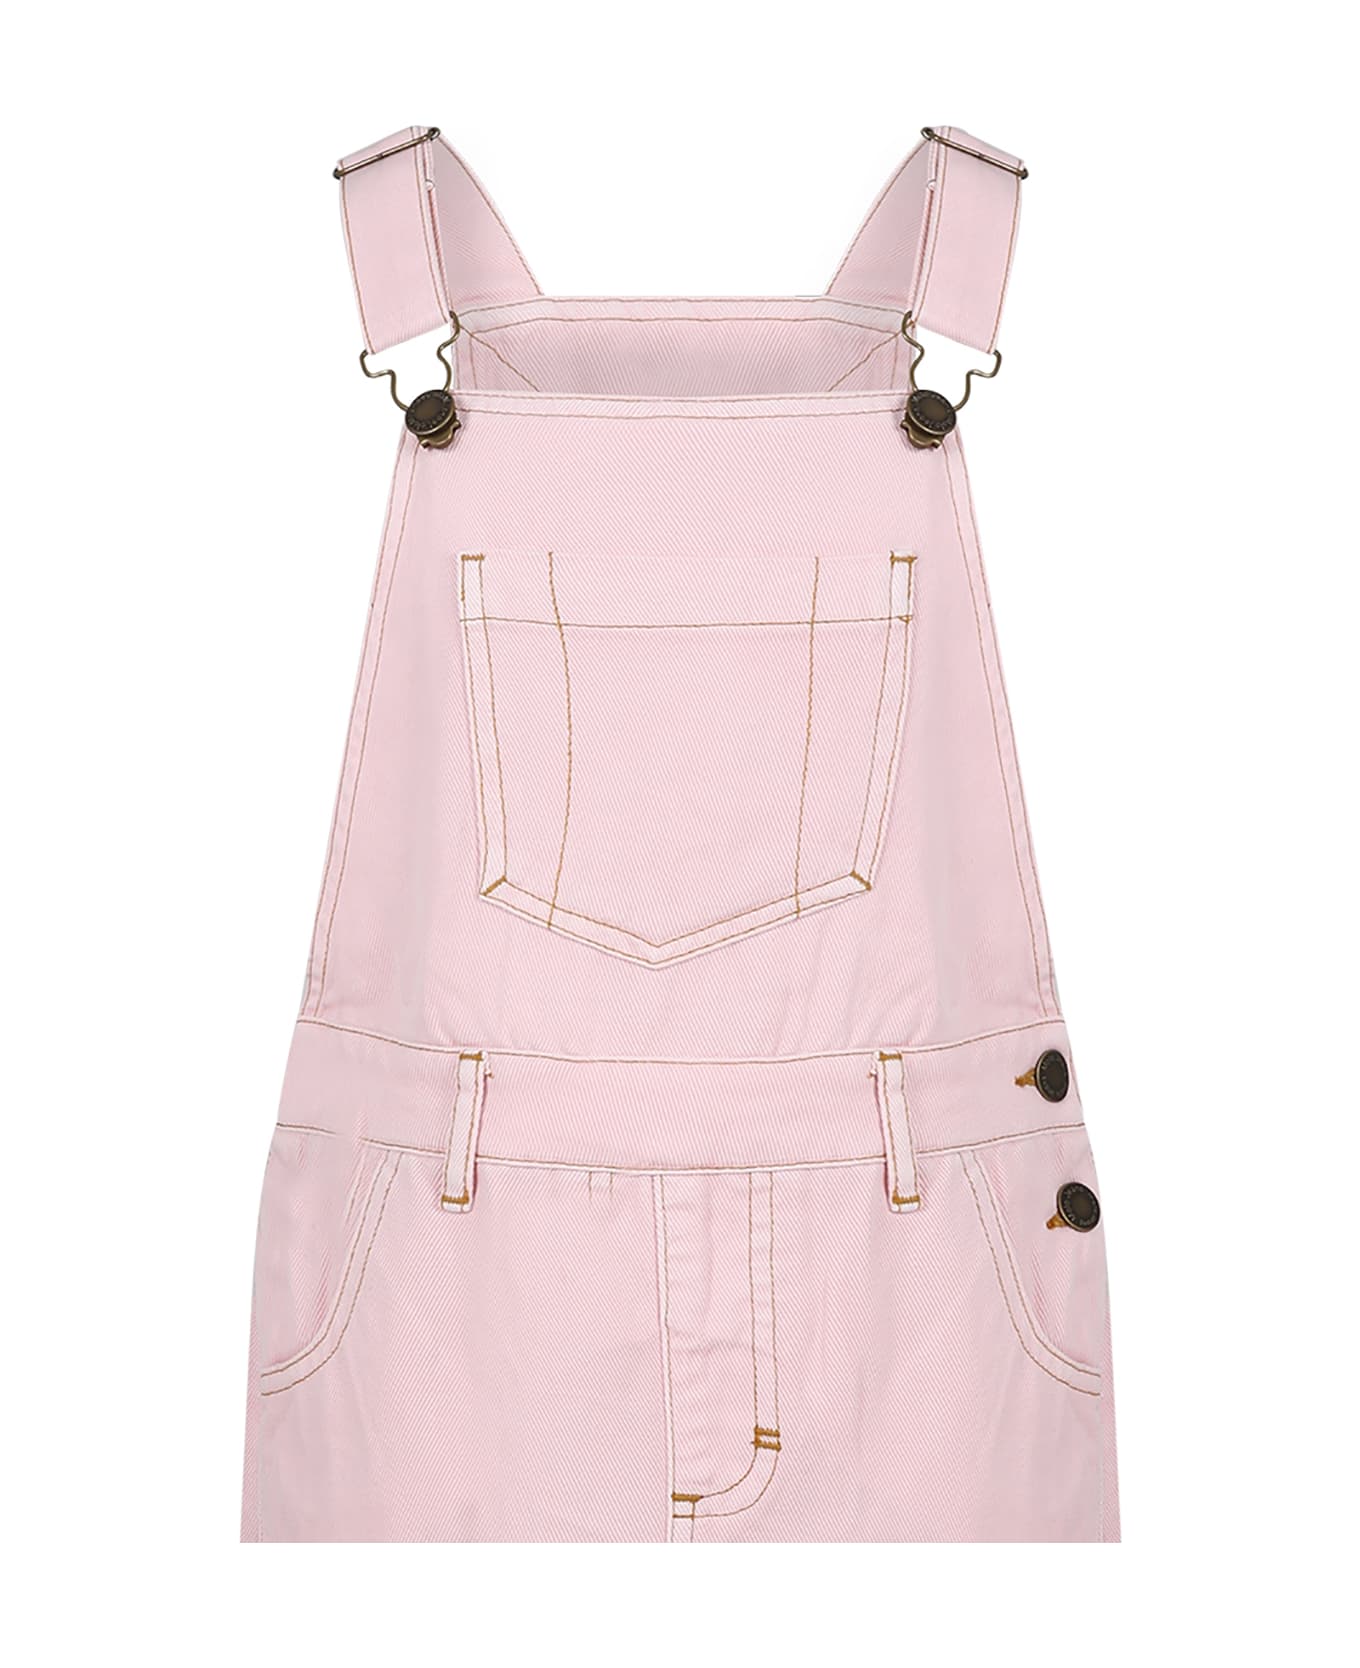 Molo Pink Dungarees For Girl With Logo - Pink